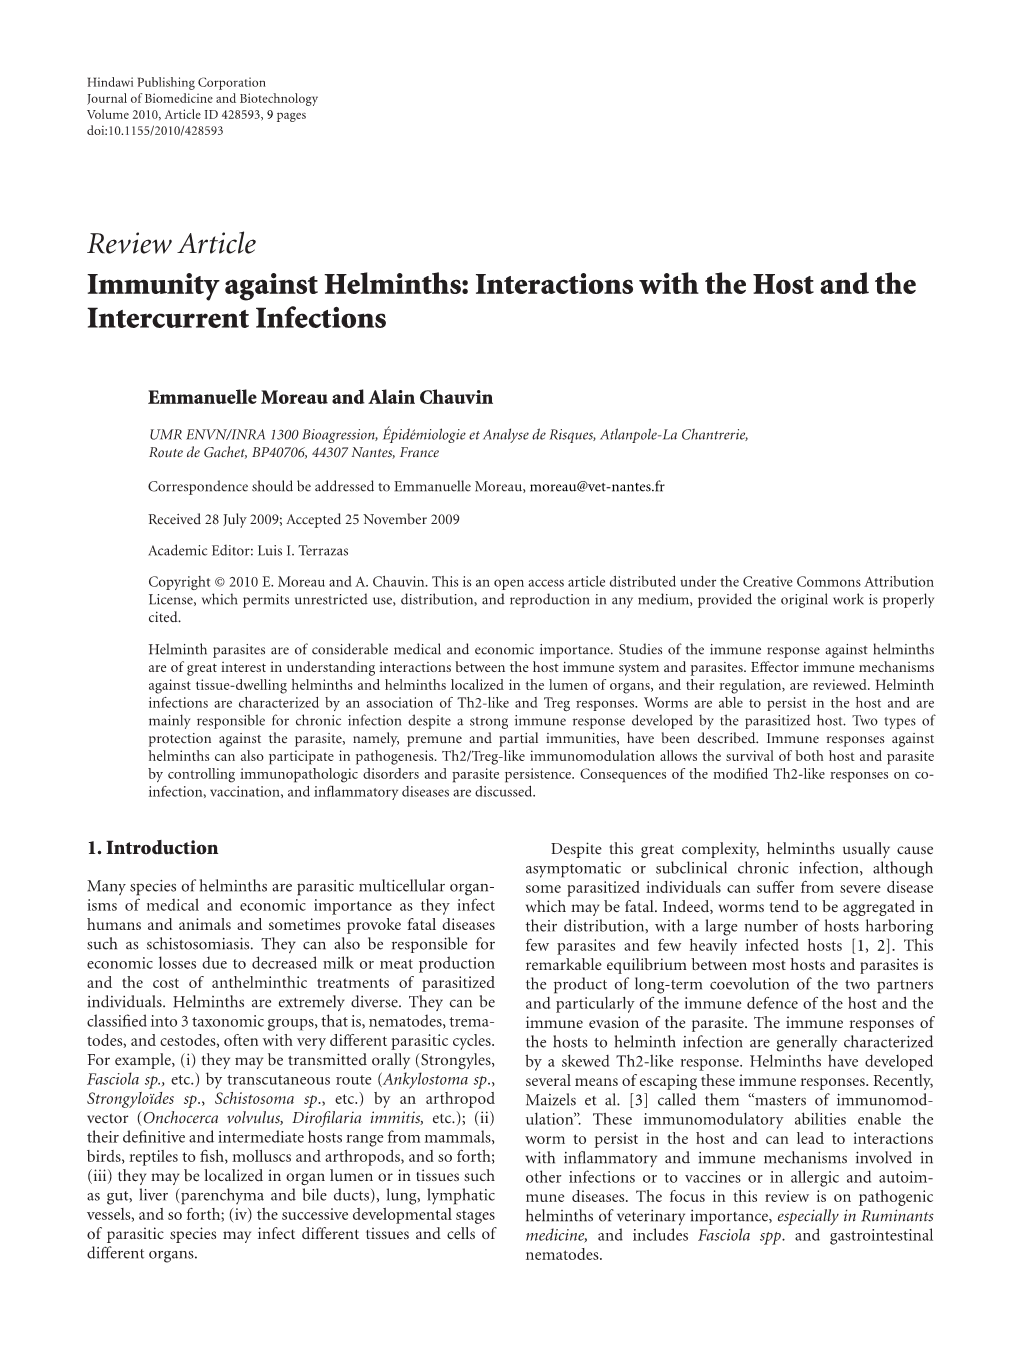 Interactions with the Host and the Intercurrent Infections